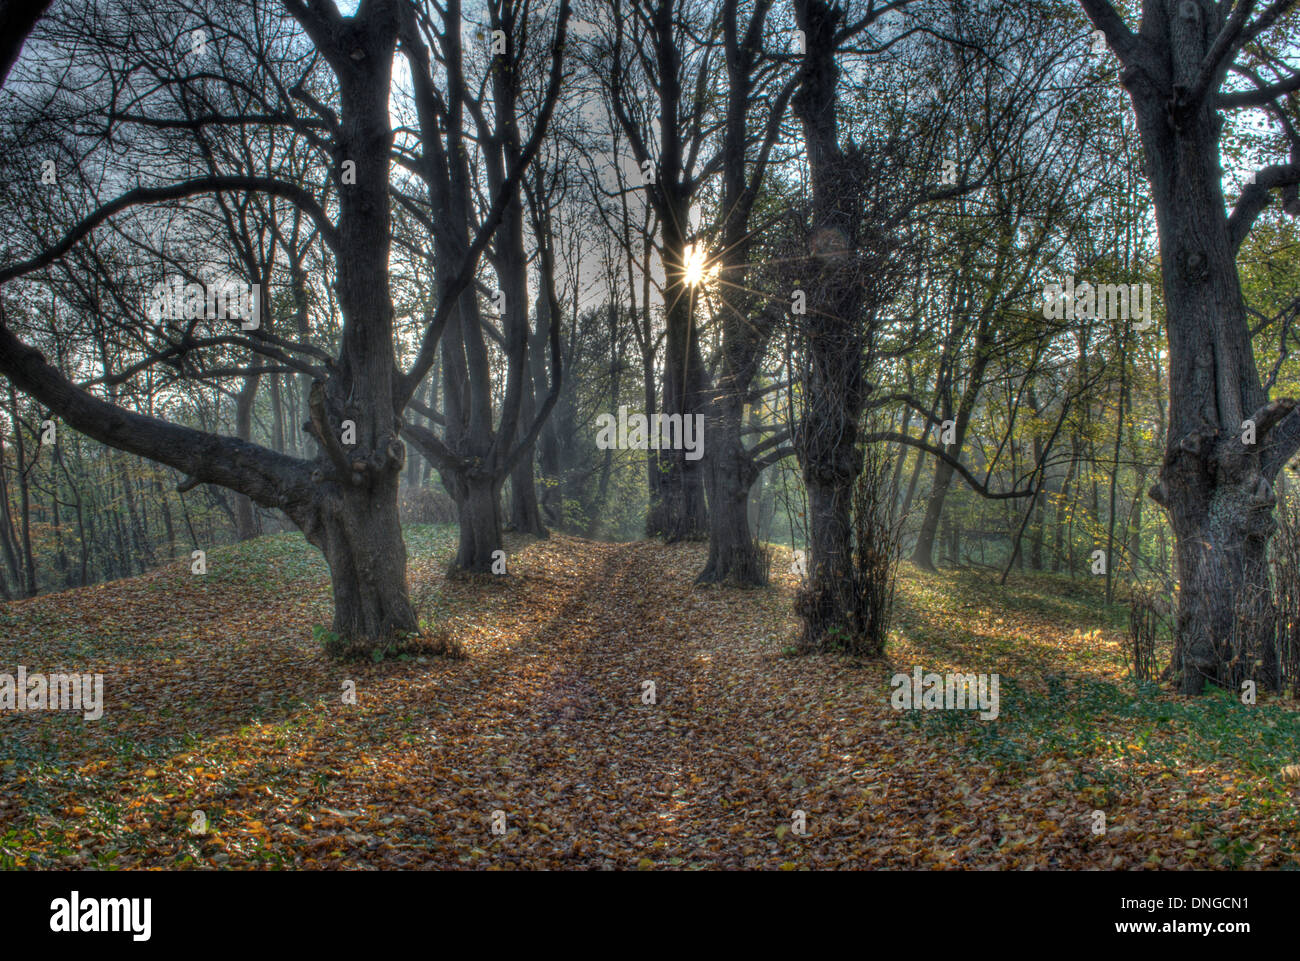 A forest in the early morning hours. Ein Wald in den Morgenstunden. Stock Photo